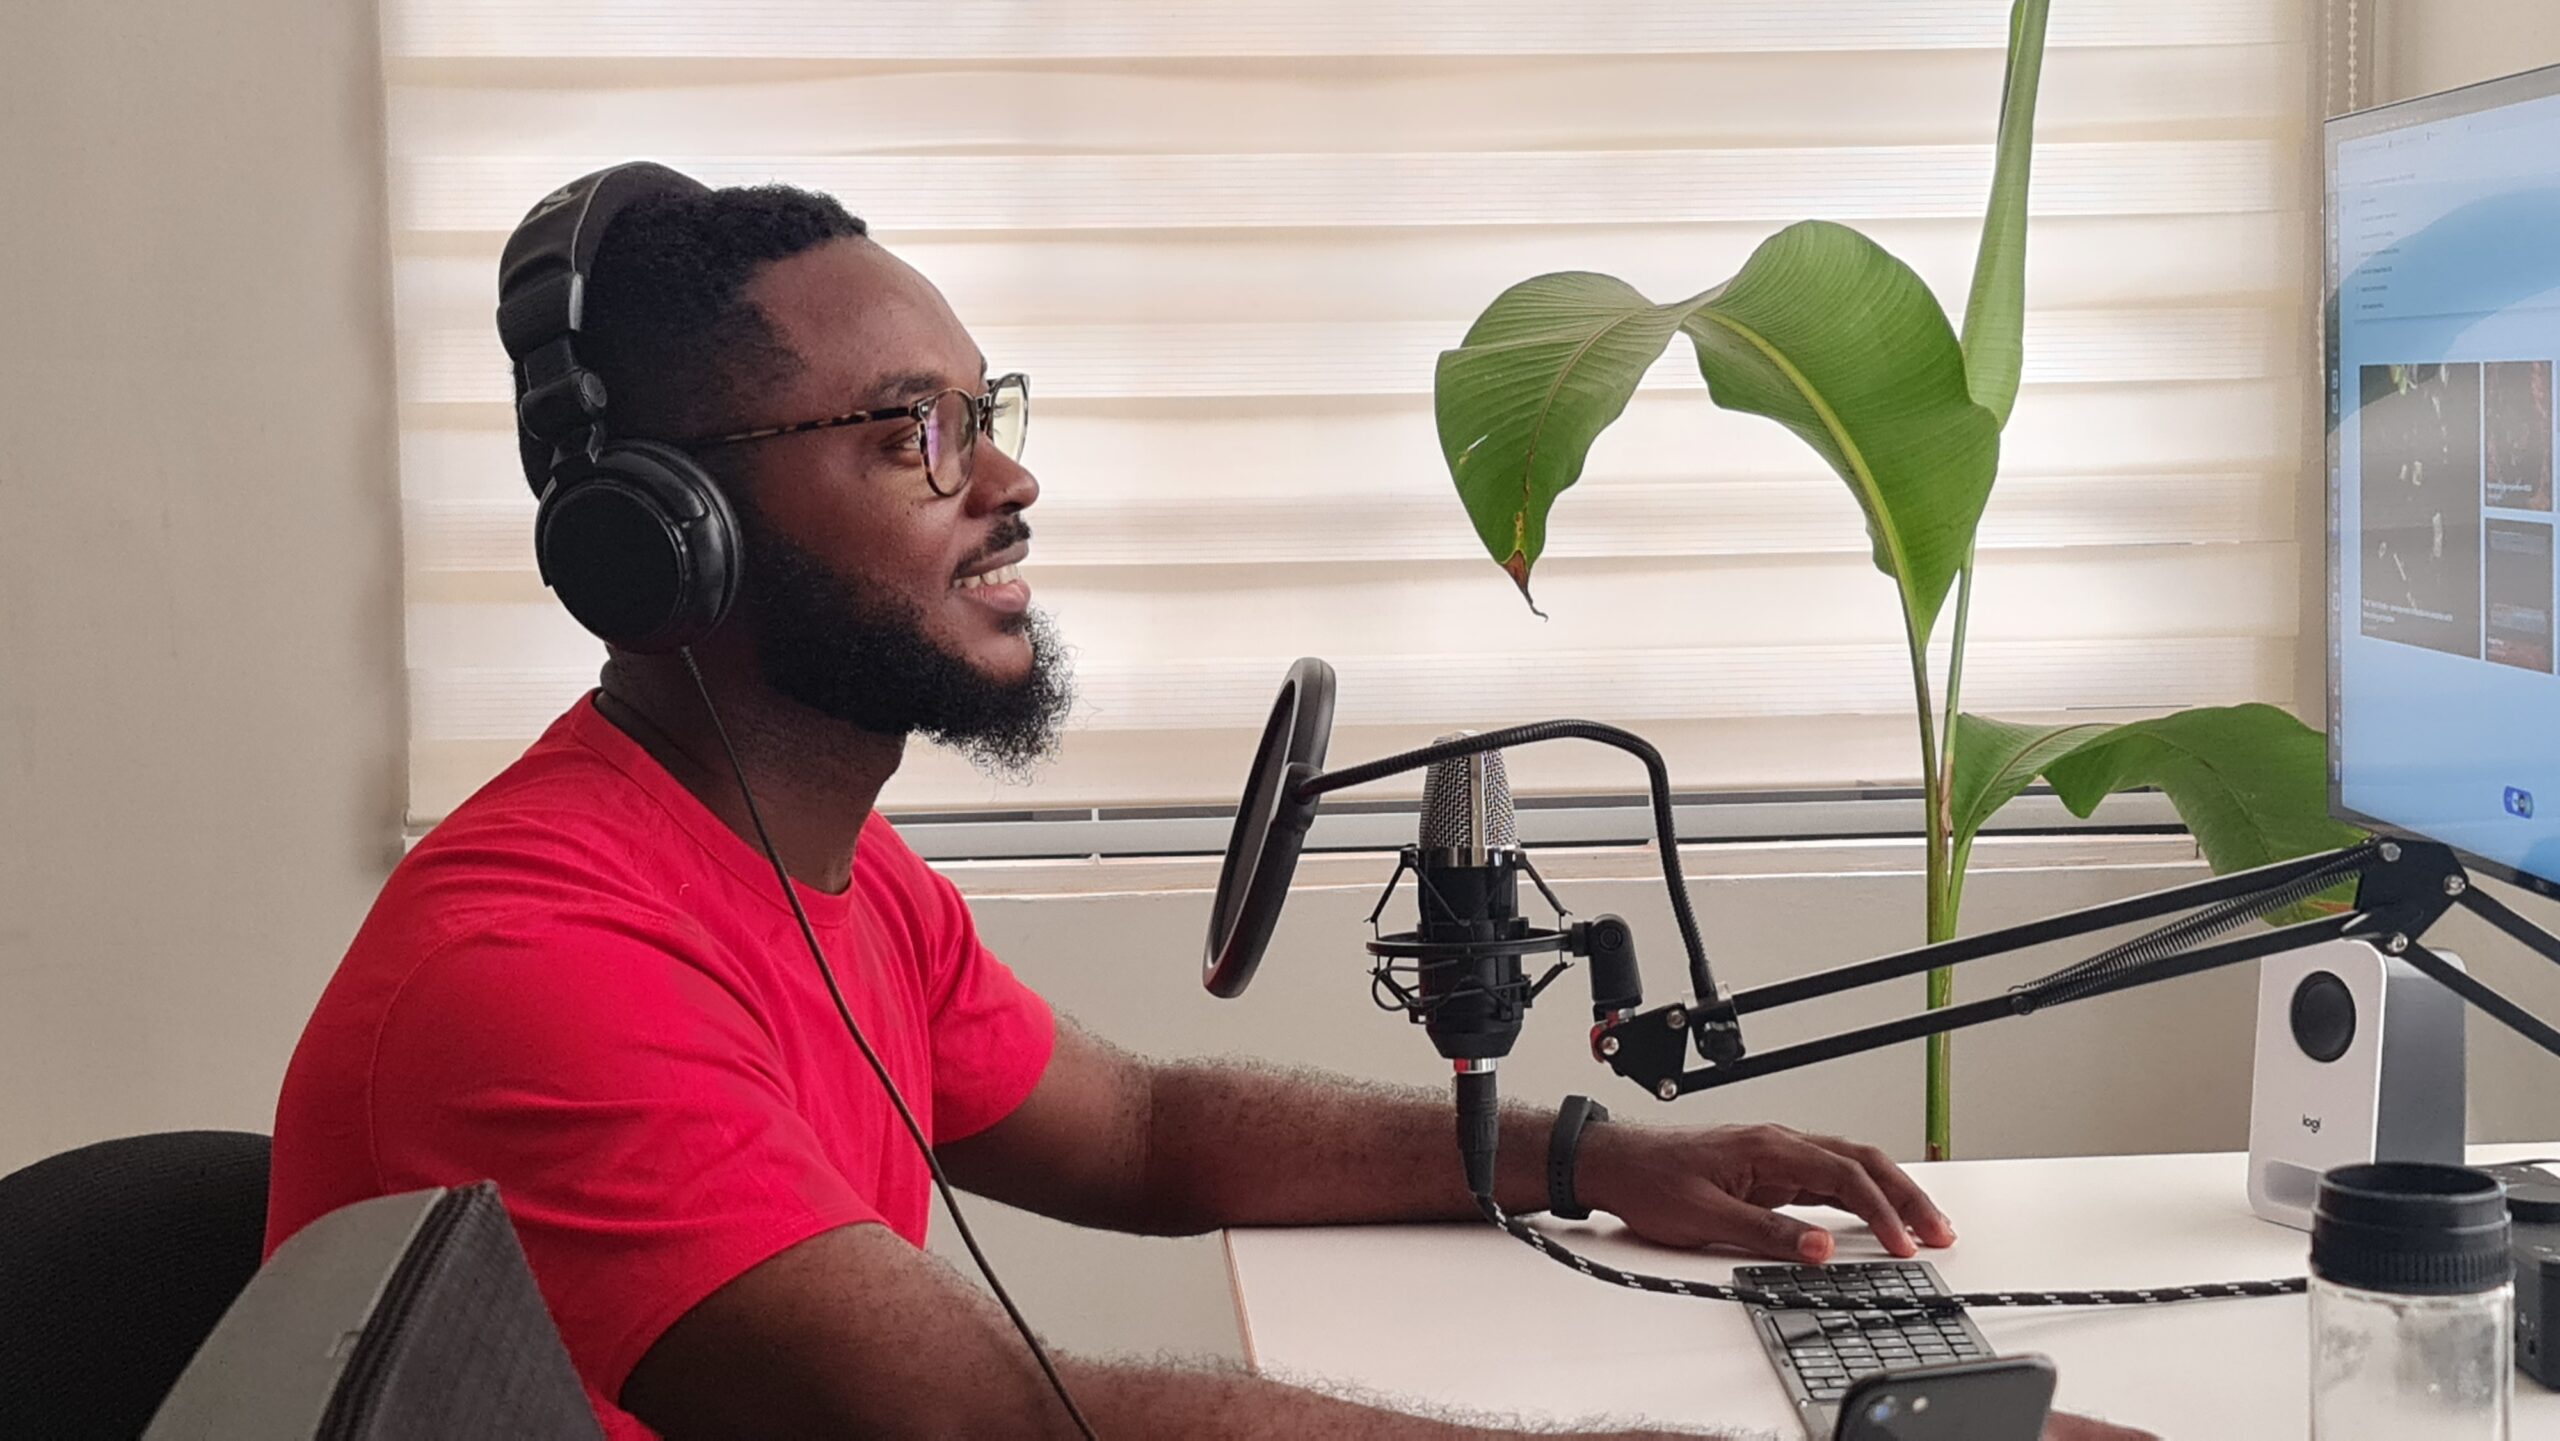 A black male podcaster recording an episode, wearing headphones and speaking into a microphone with passion and confidence.